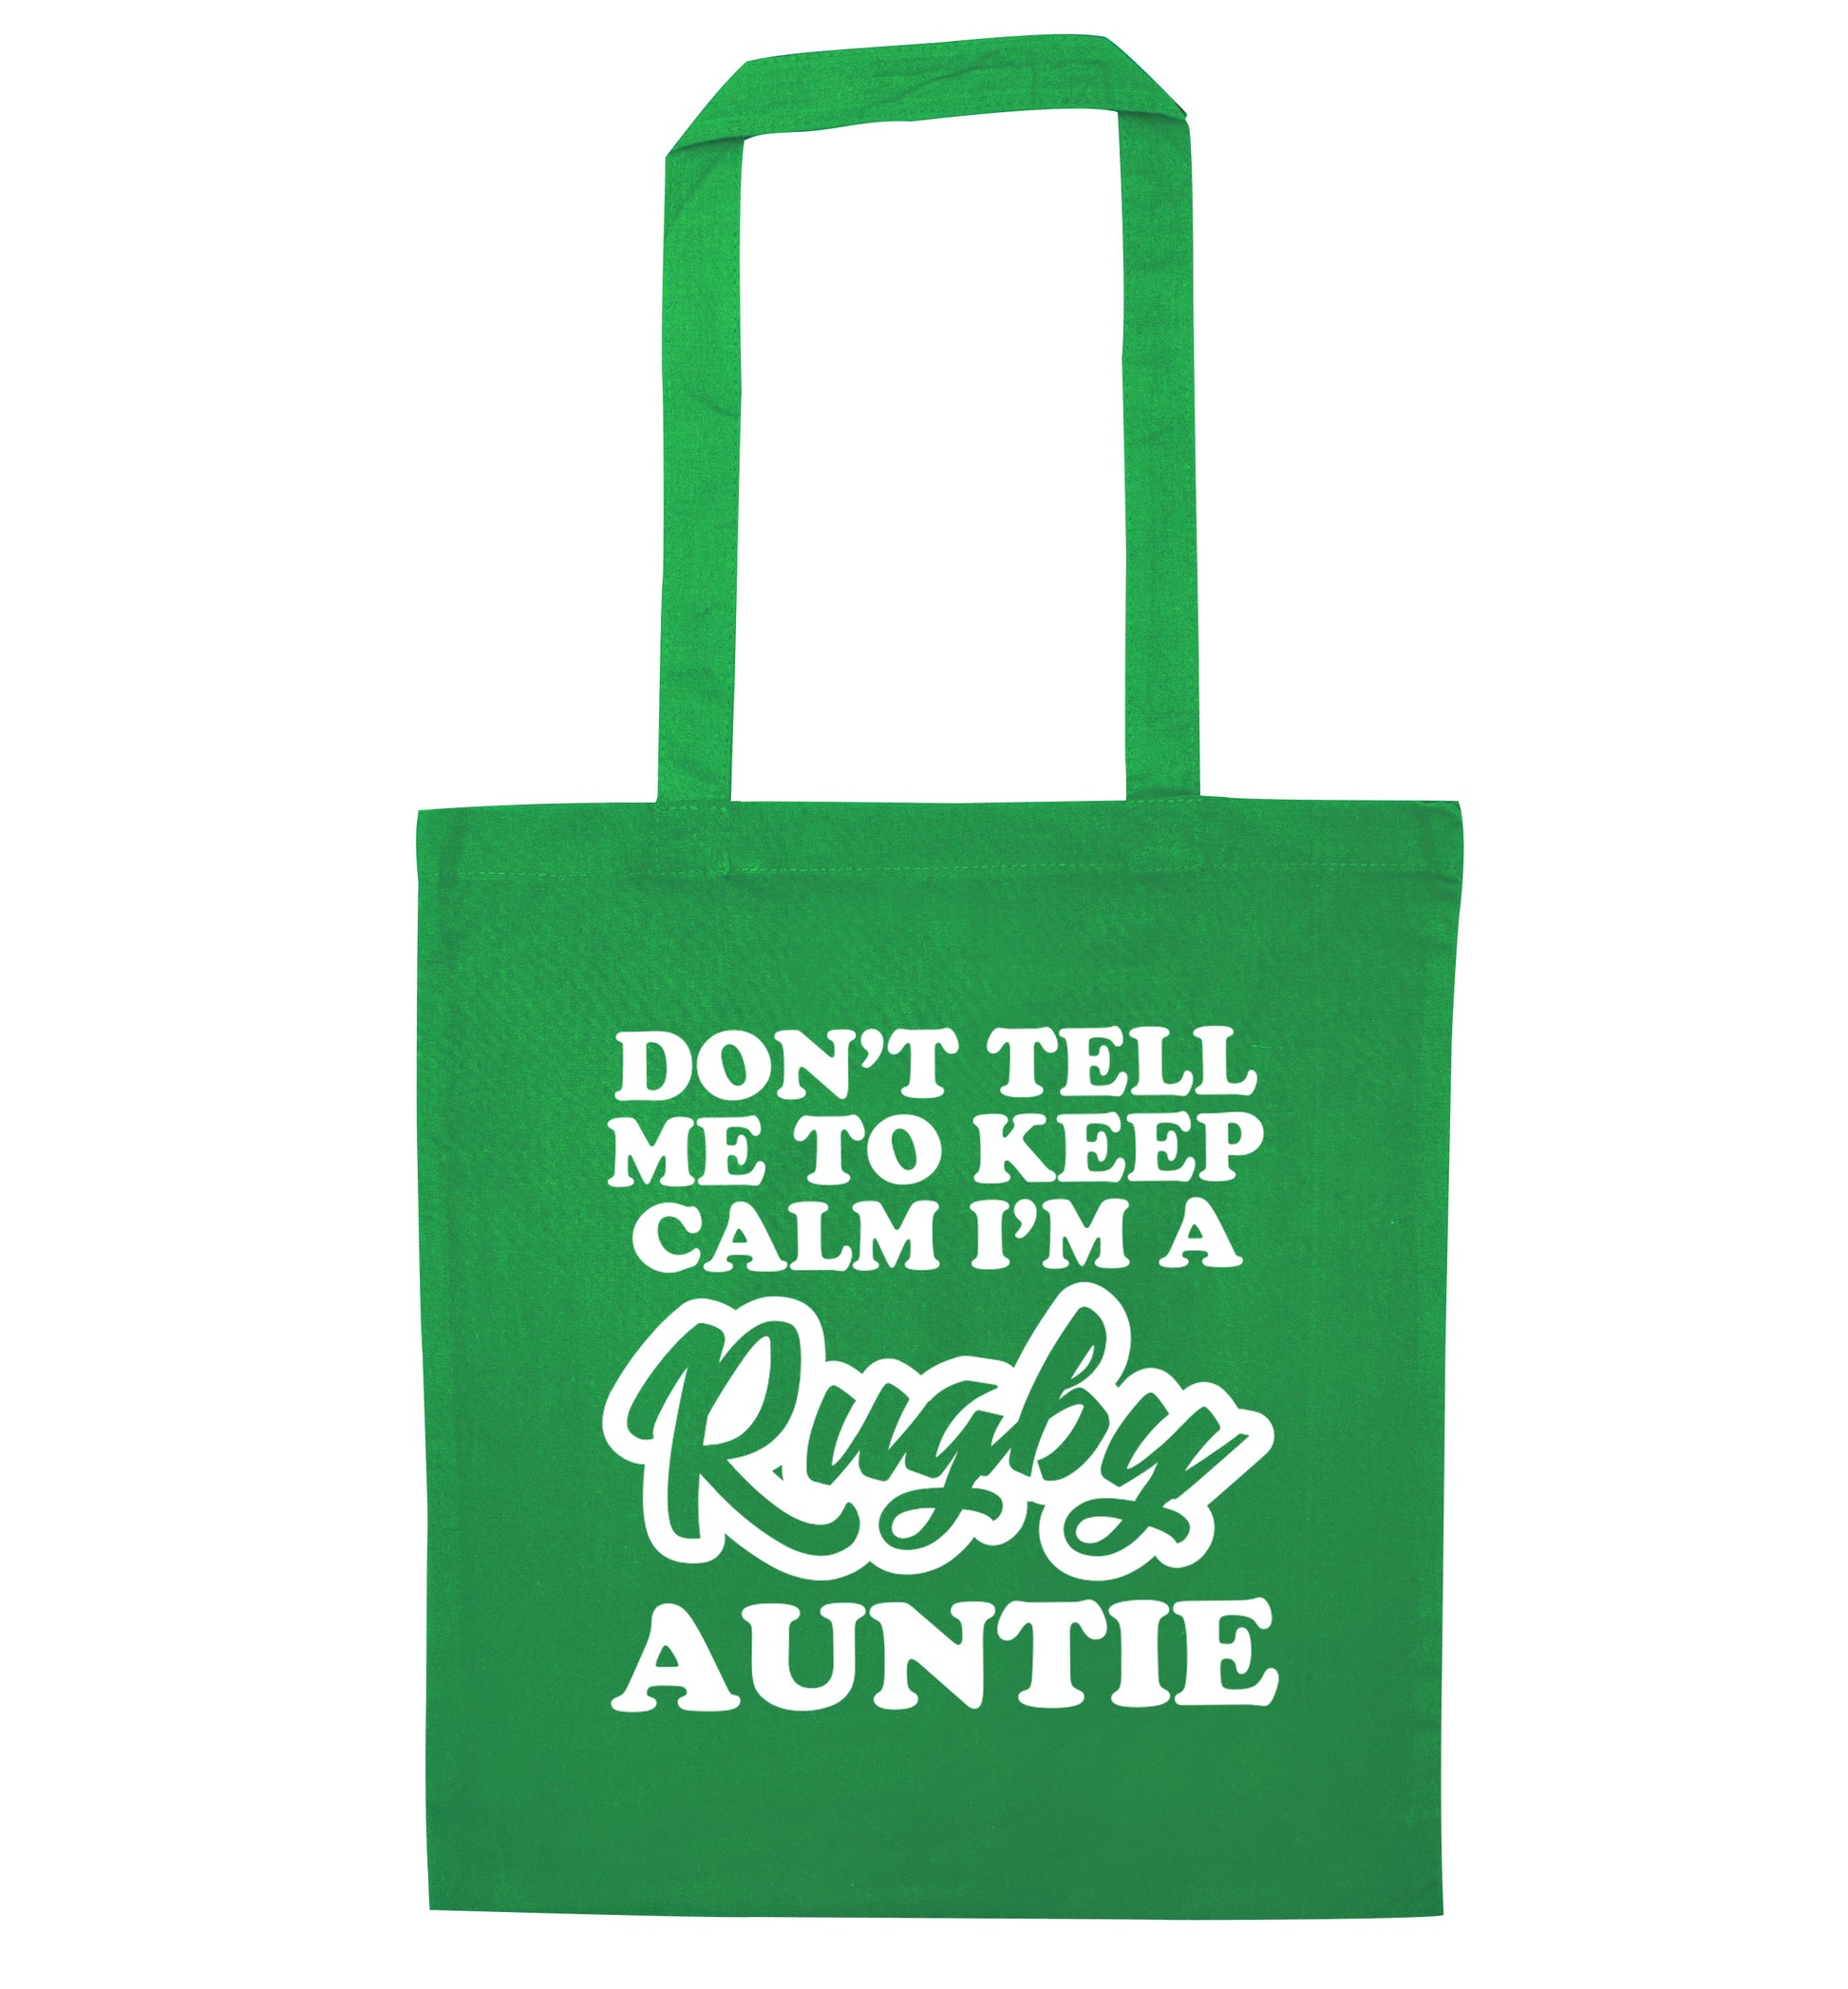 Don't tell me keep calm I'm a rugby auntie green tote bag